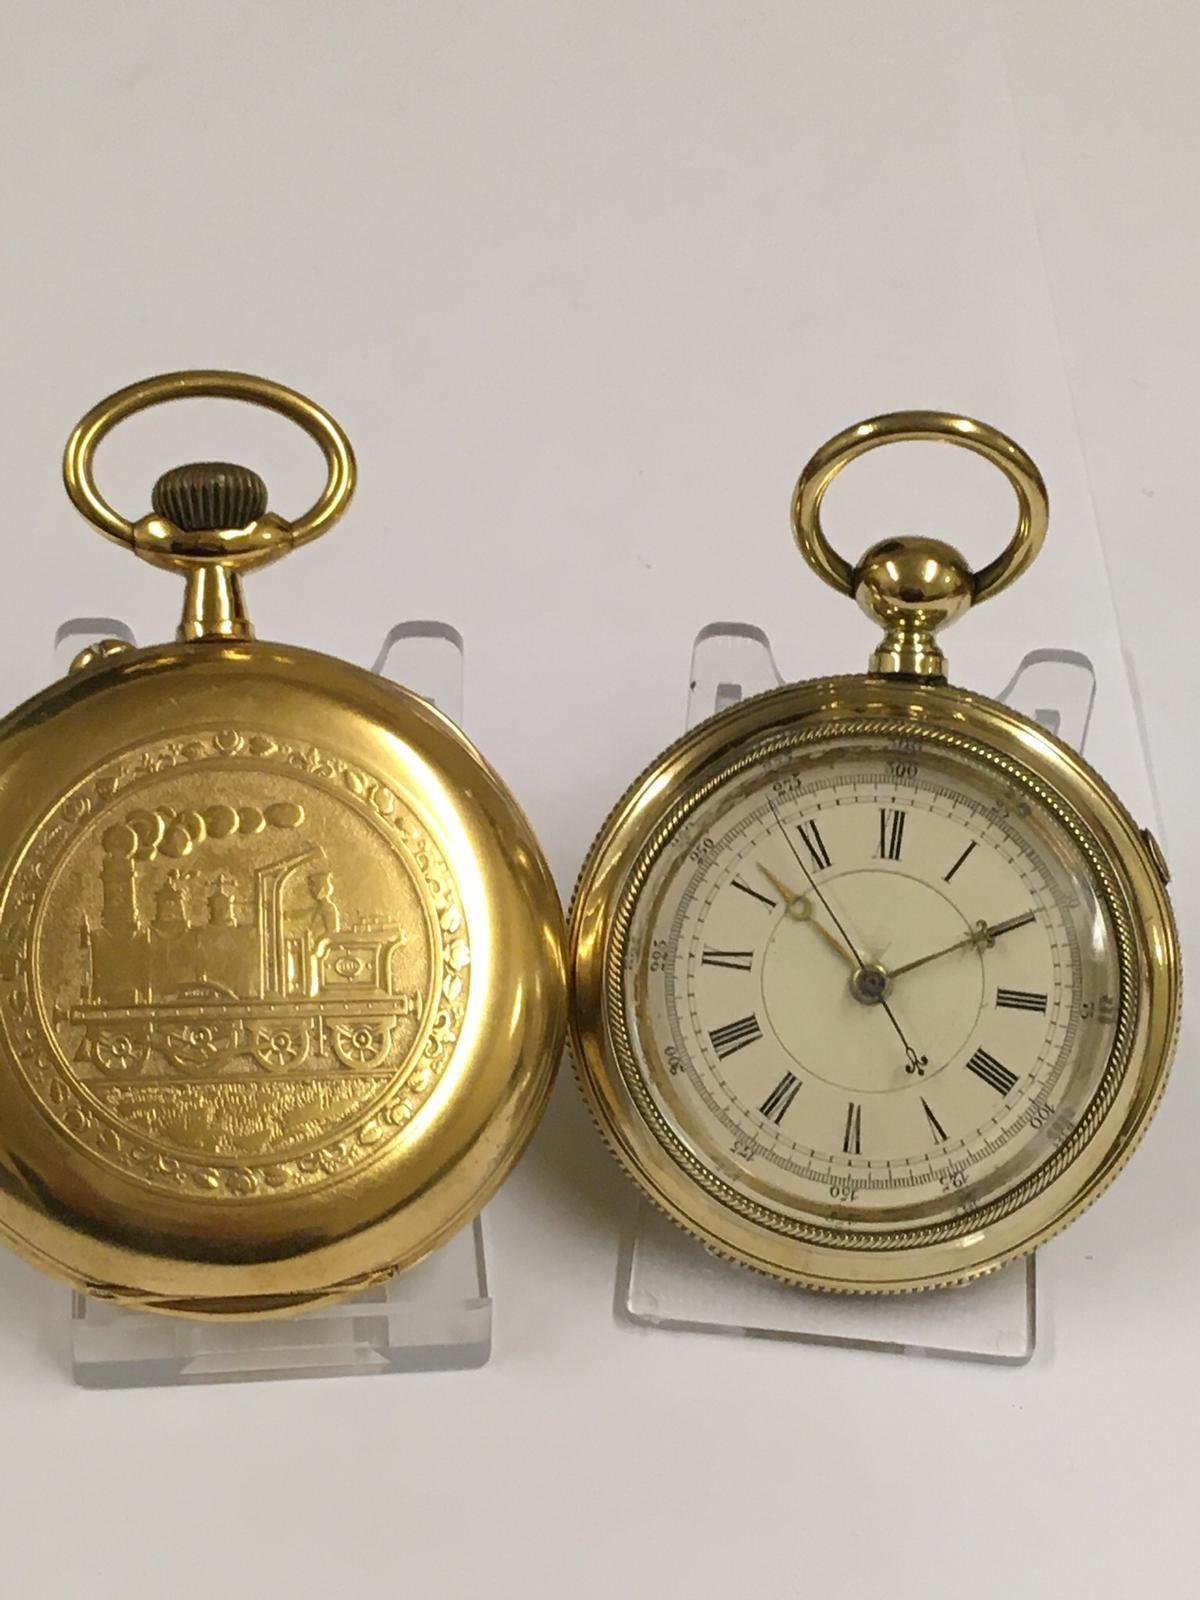 Antique Goliath pocket watch and very large antique Chronograph pocket watch (2) - Image 3 of 11